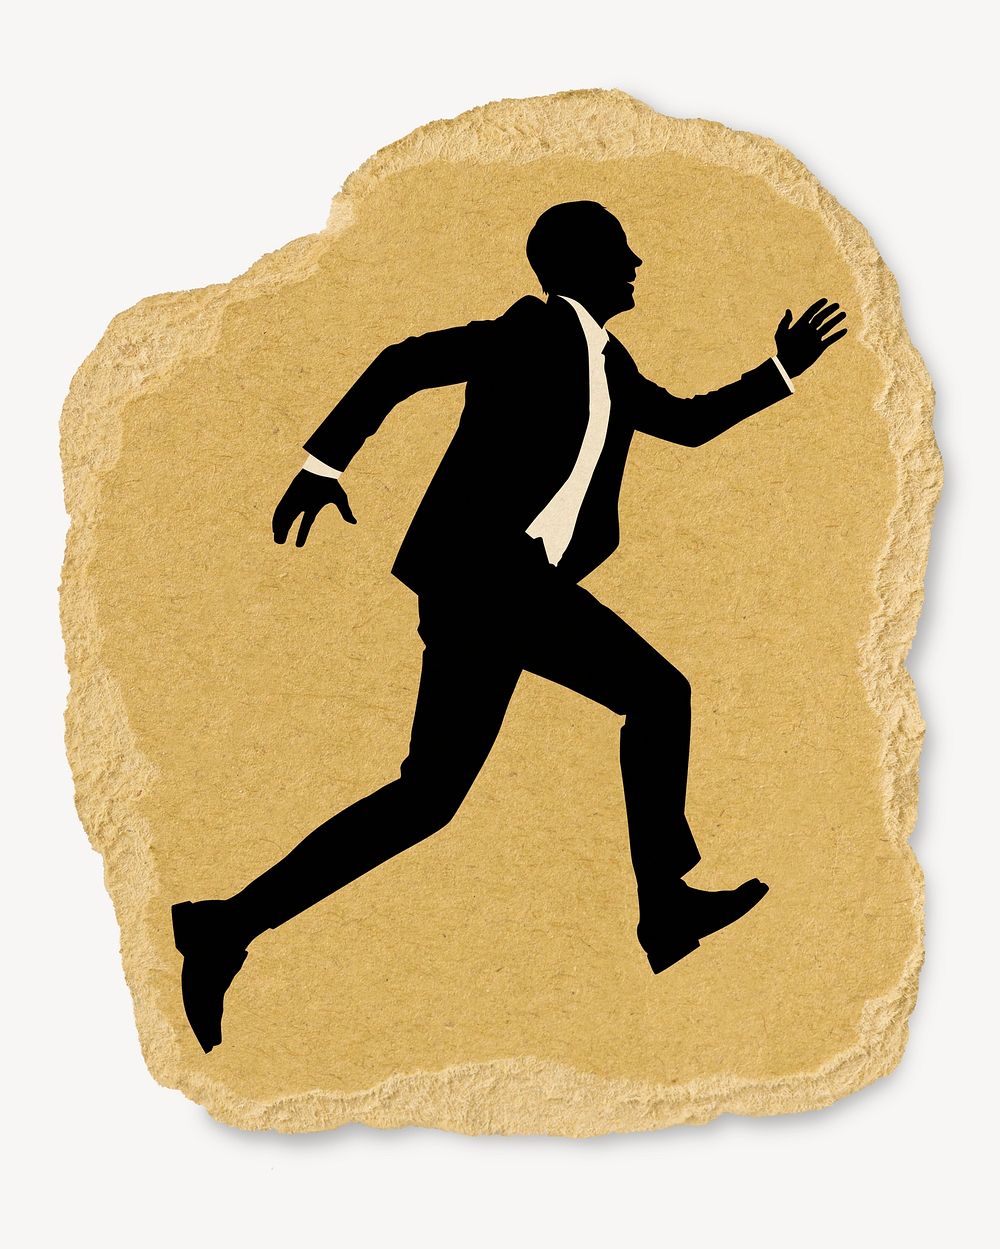 Running businessman silhouette ripped paper, sticker collage element 